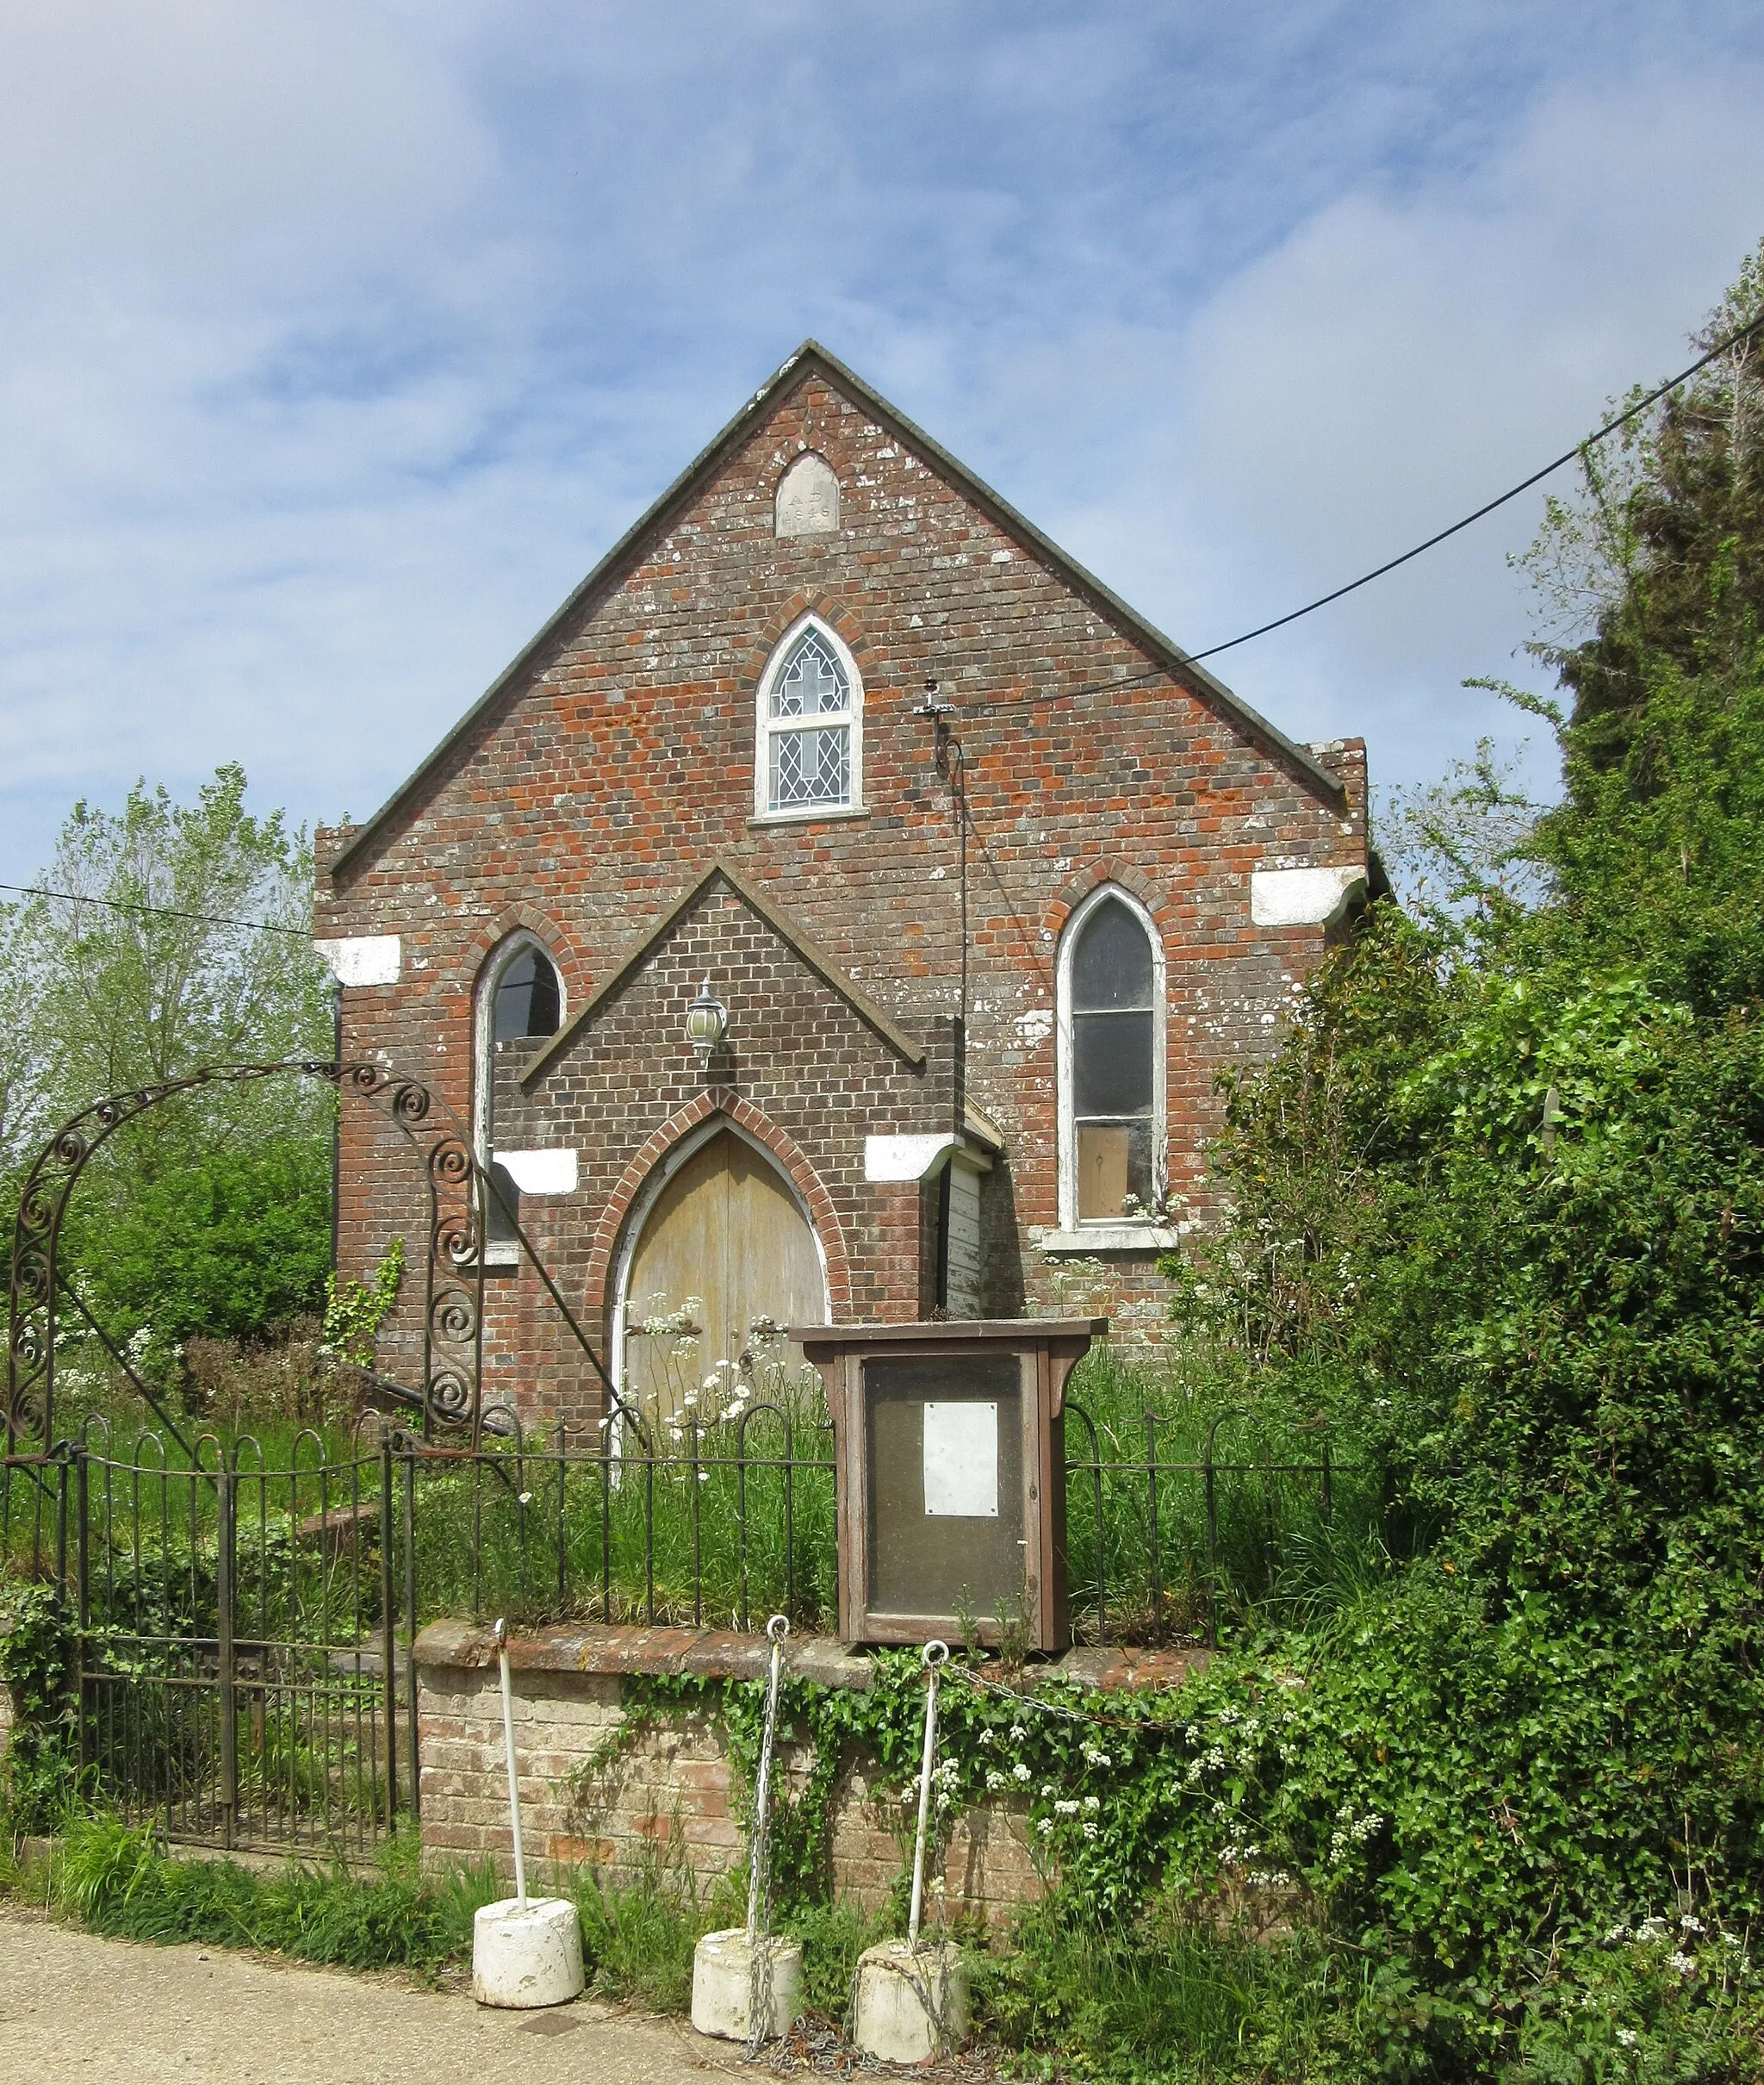 Photo showing: Former Methodist Church, Chapel Lane, Merstone, Isle of Wight, England.  Built in 1848; closed in 2006 and converted into a house.